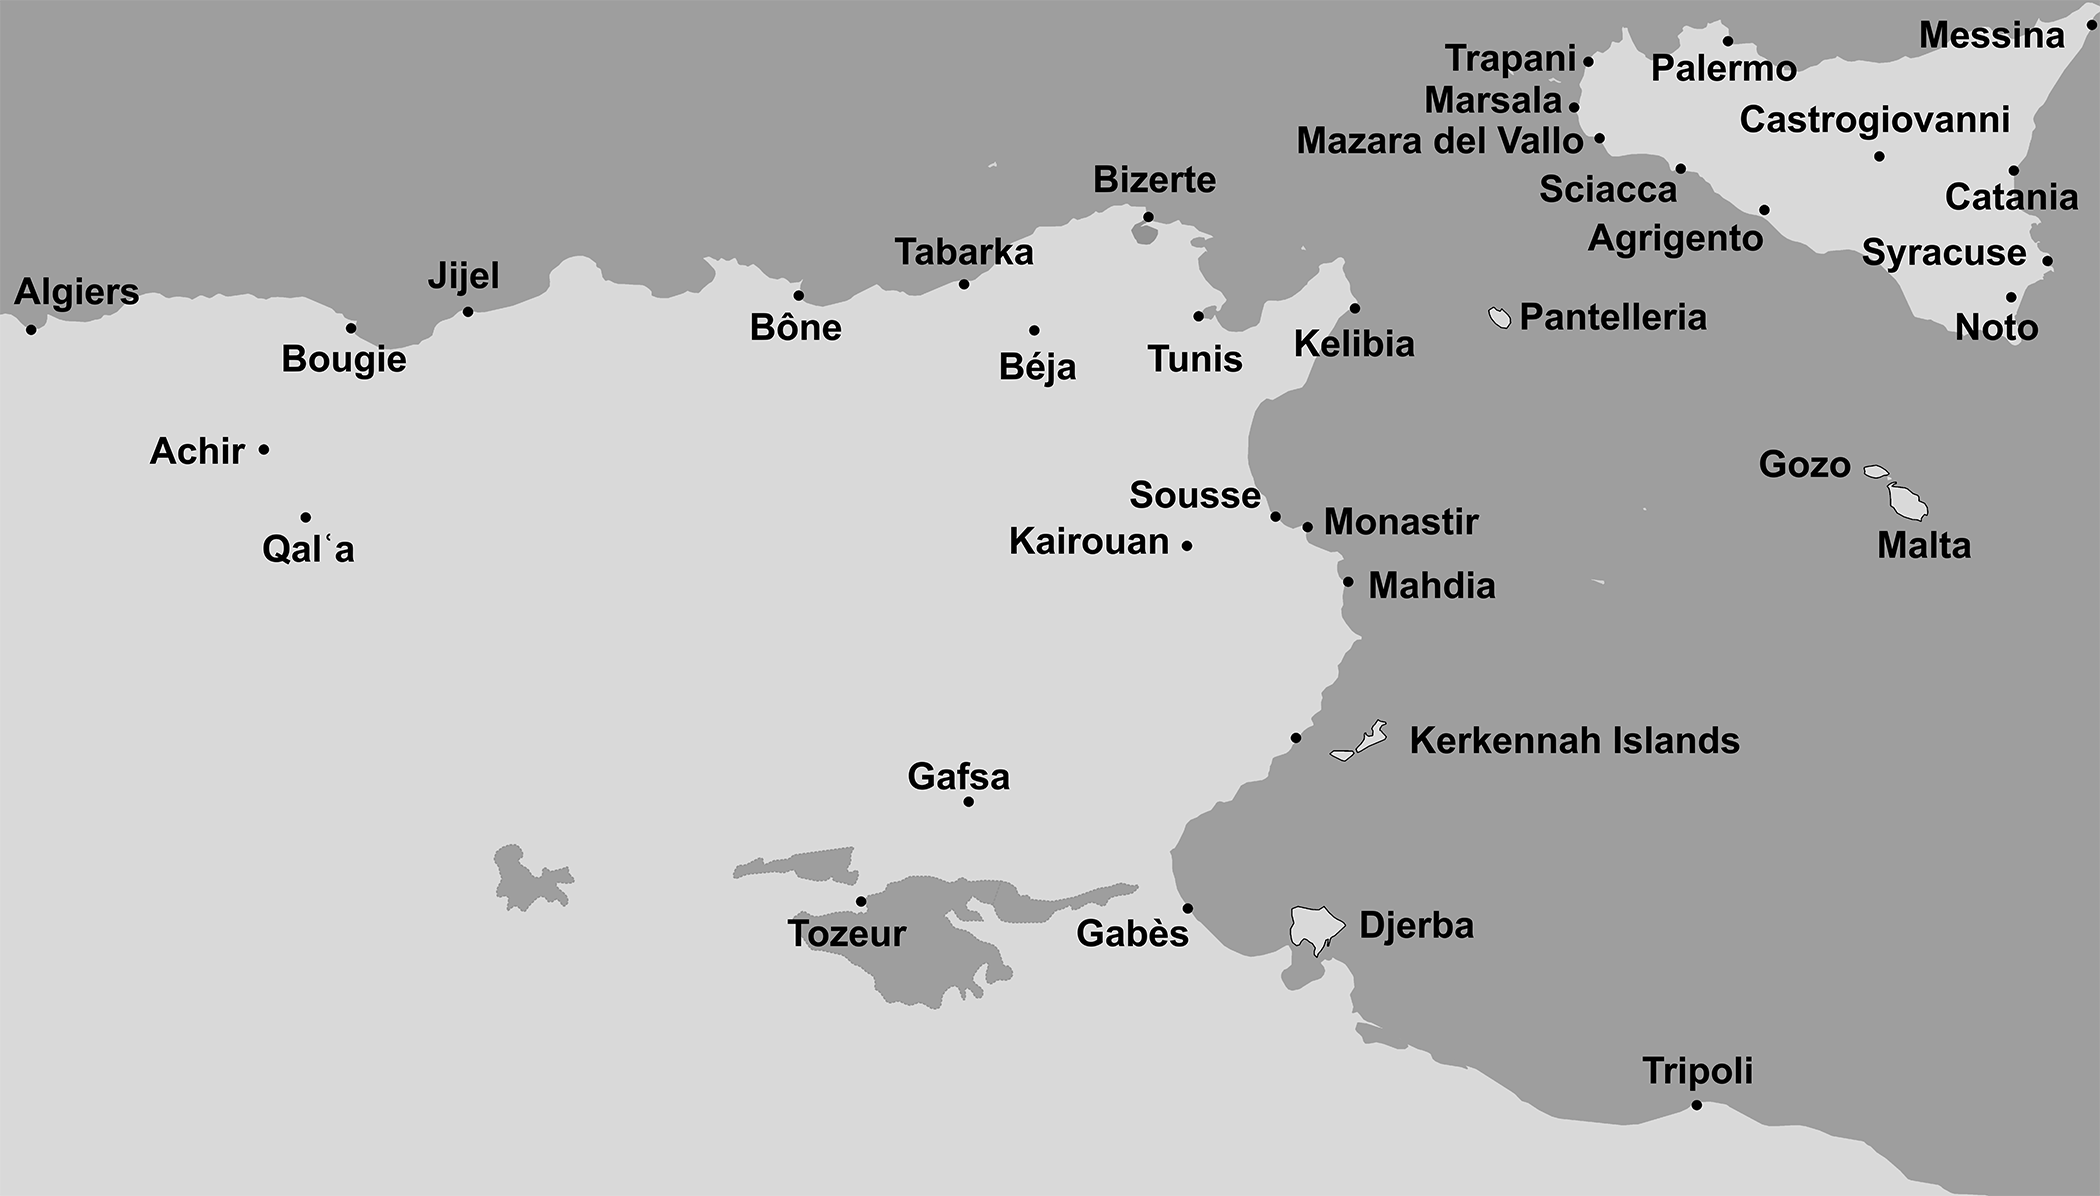 Figure 1: A map shows major urban centers in medieval Ifriqiya and Sicily.